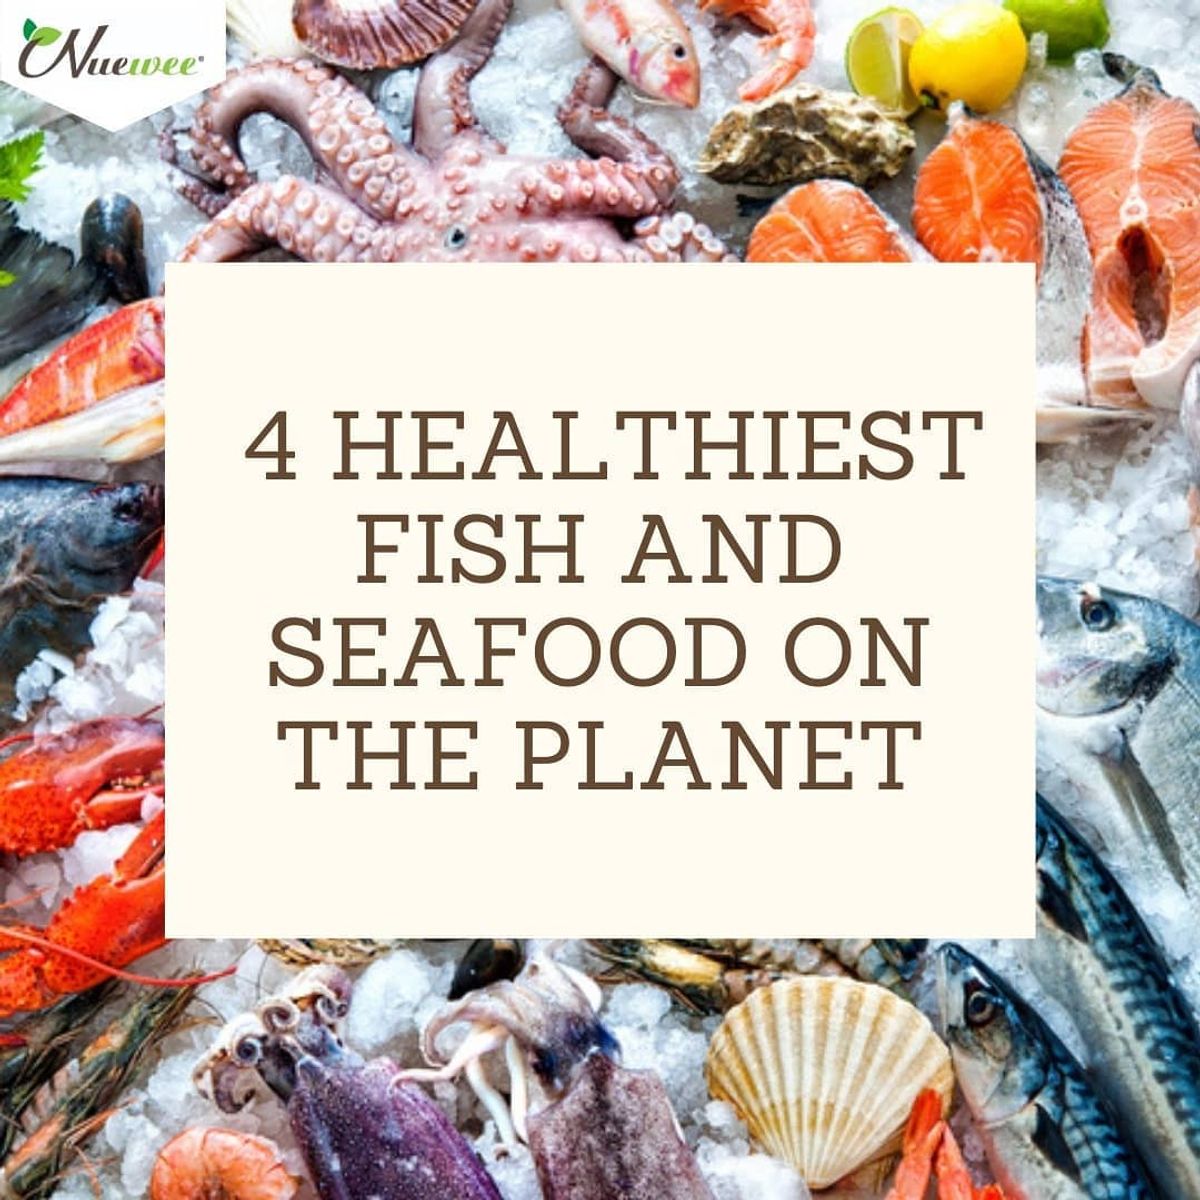 4 HEALTHIEST FISH AND SEAFOOD ON THE PLANET